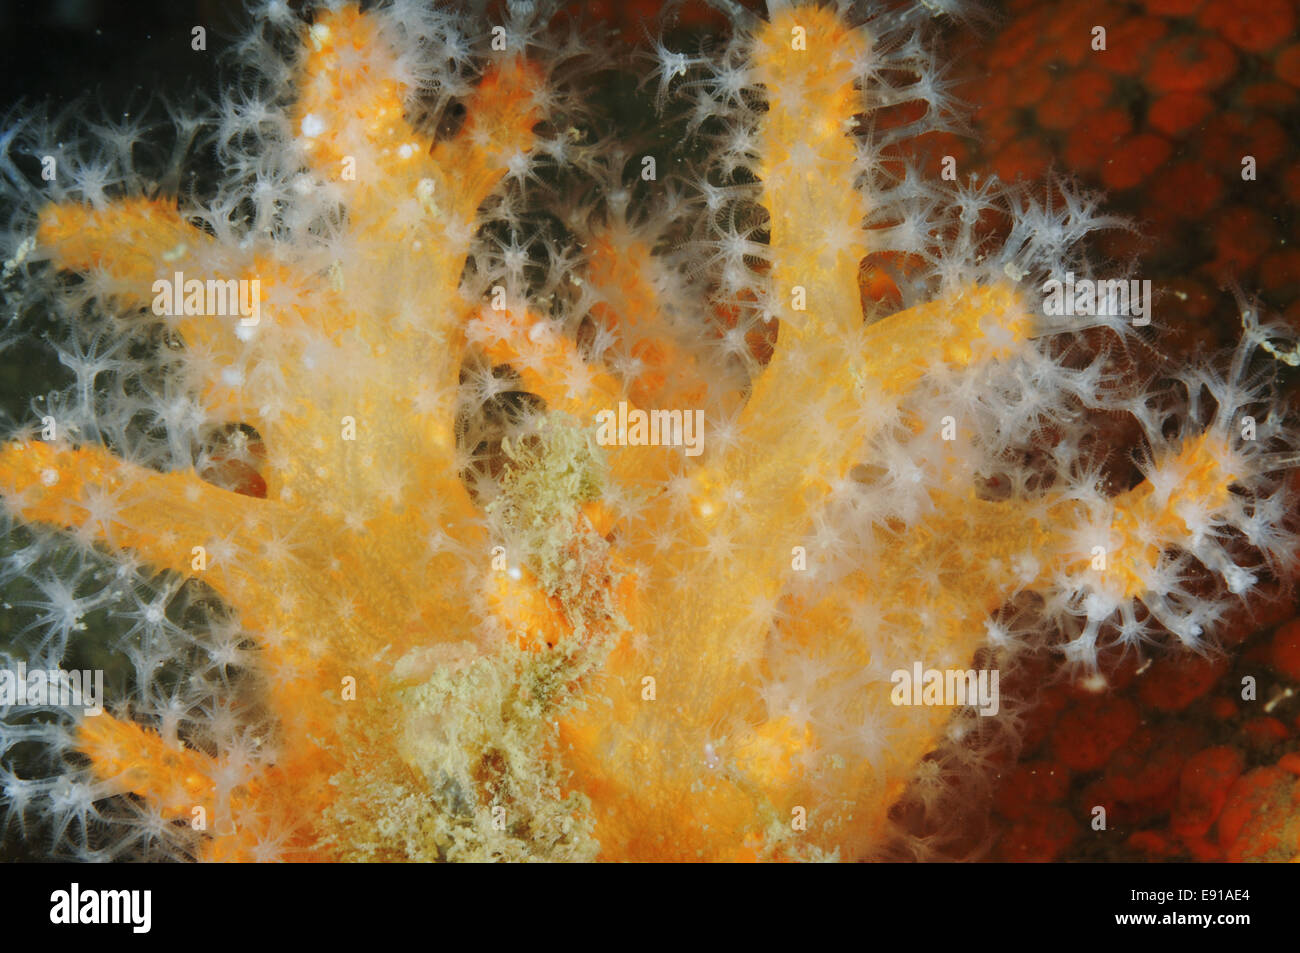 Colony of dead man's fingers soft coral with white polyps extended. Stock Photo